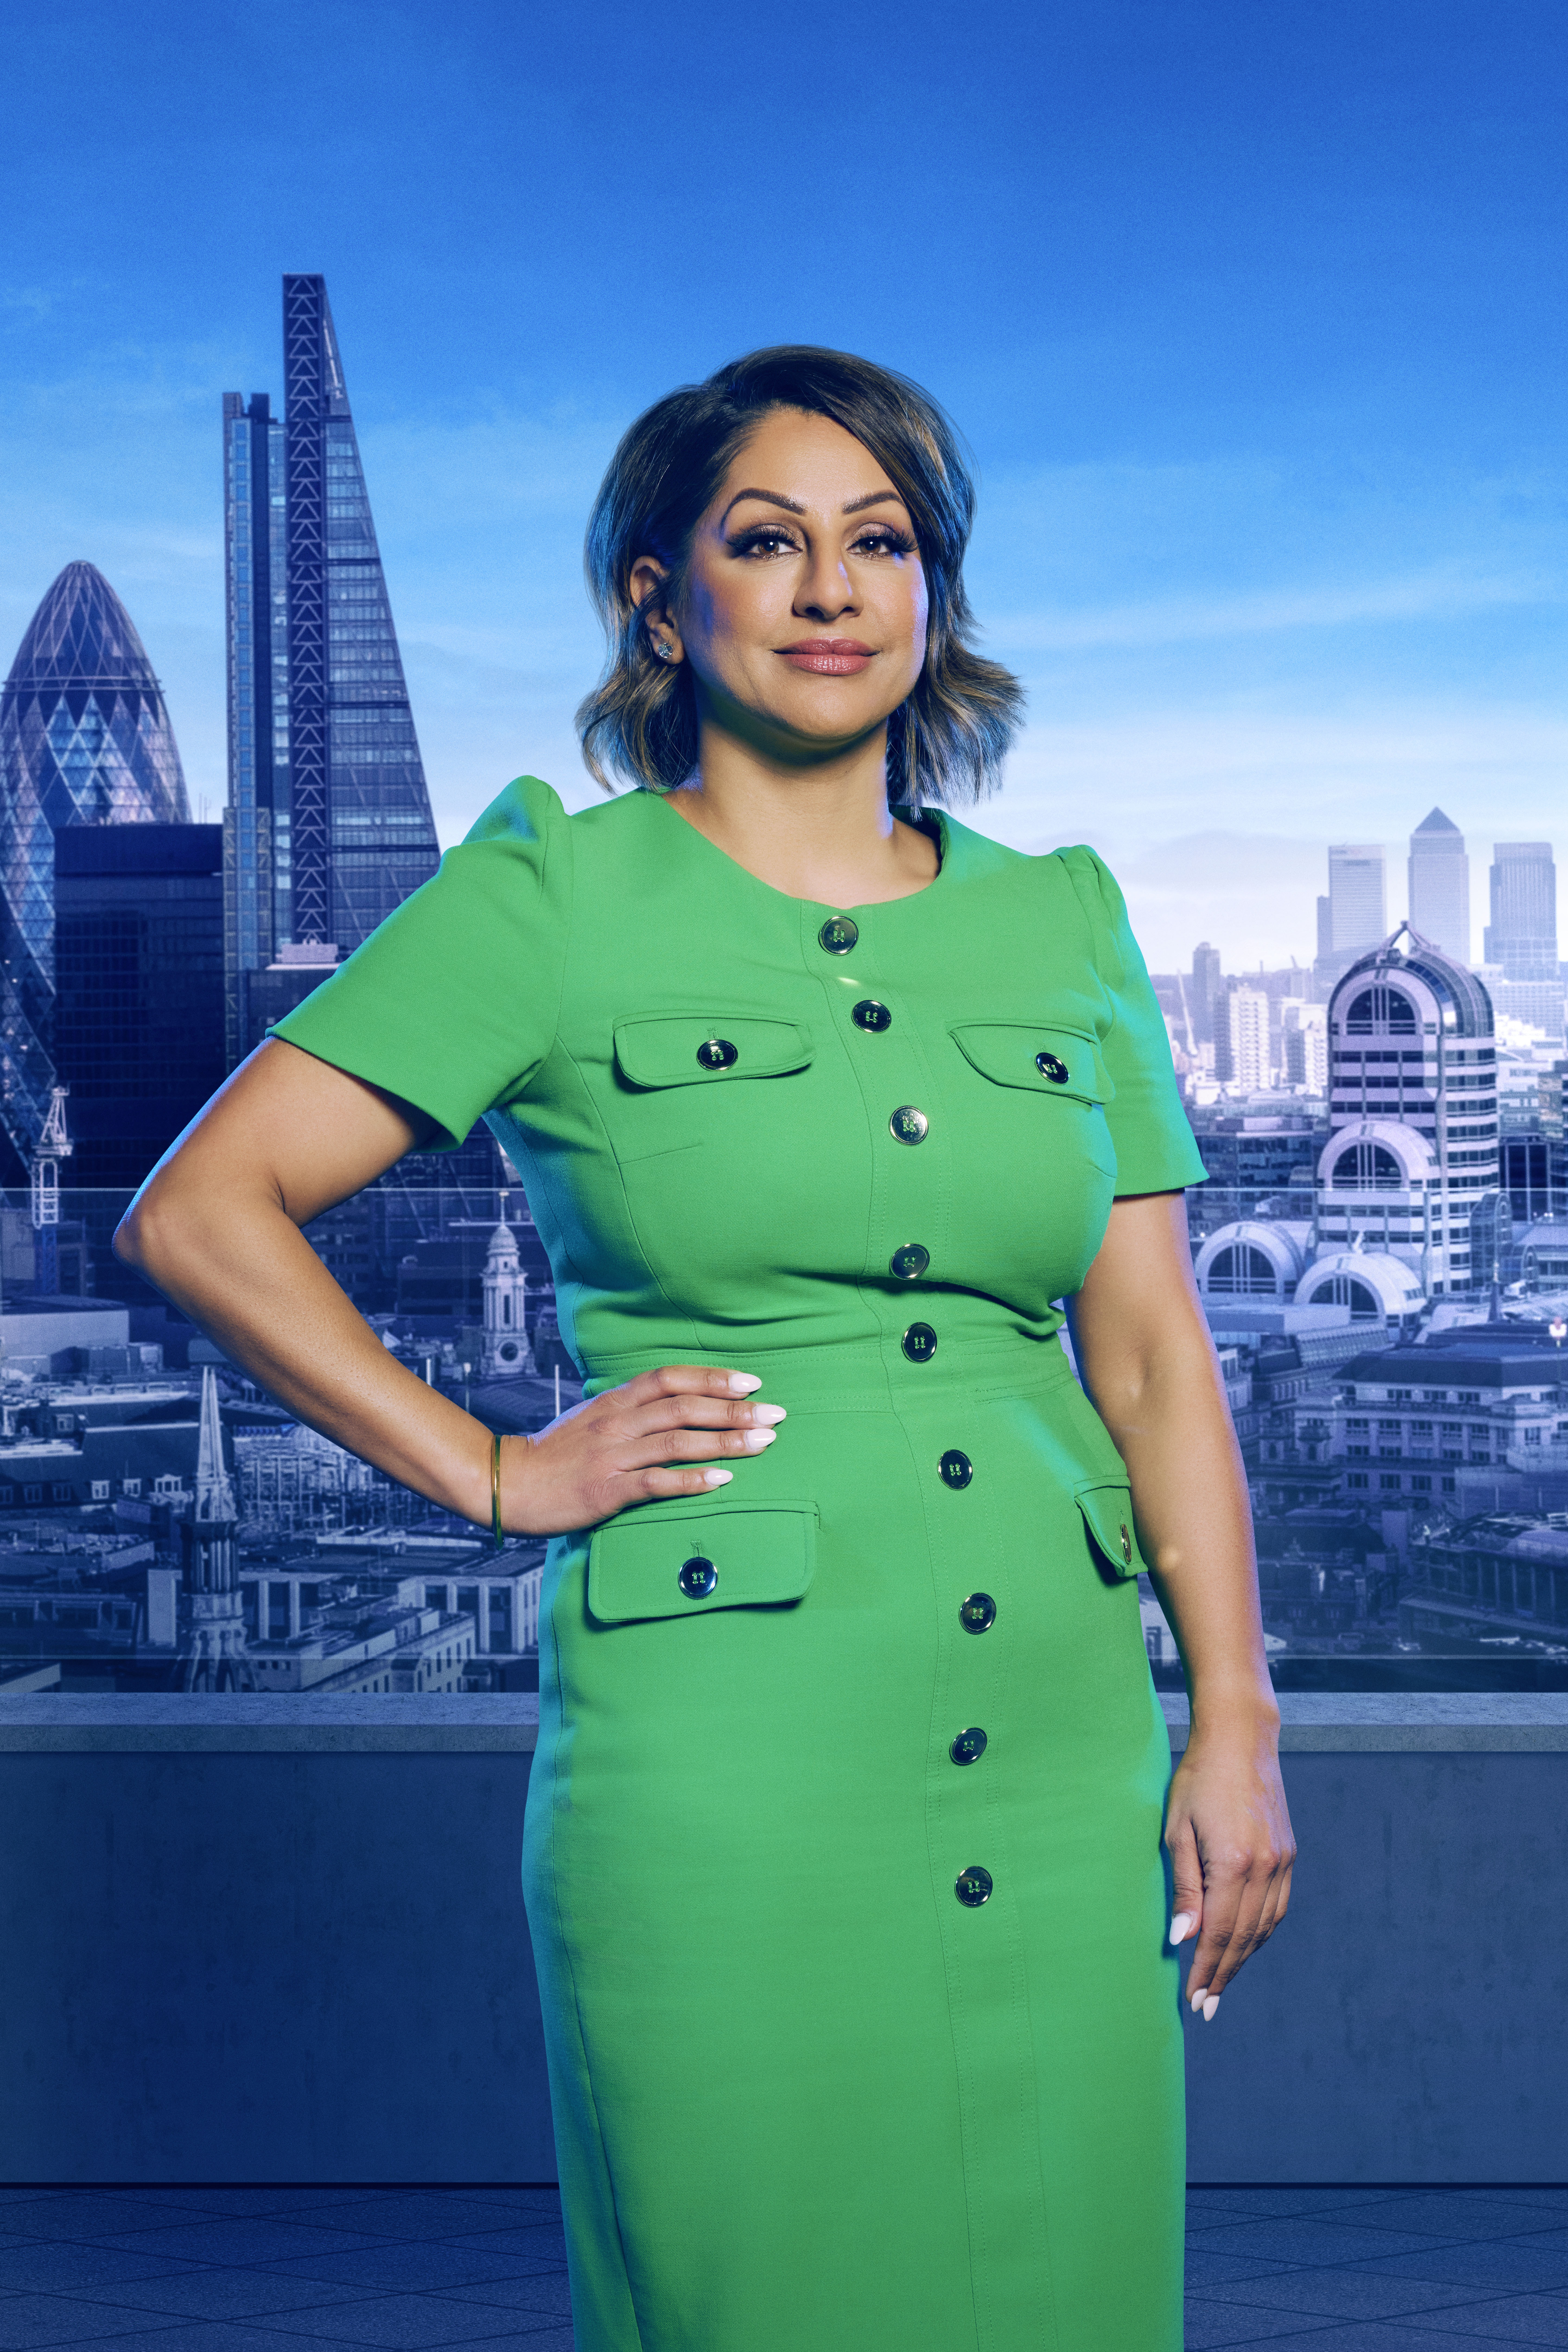 Raj has already collected a number of titles - can she add The Apprentice winner?